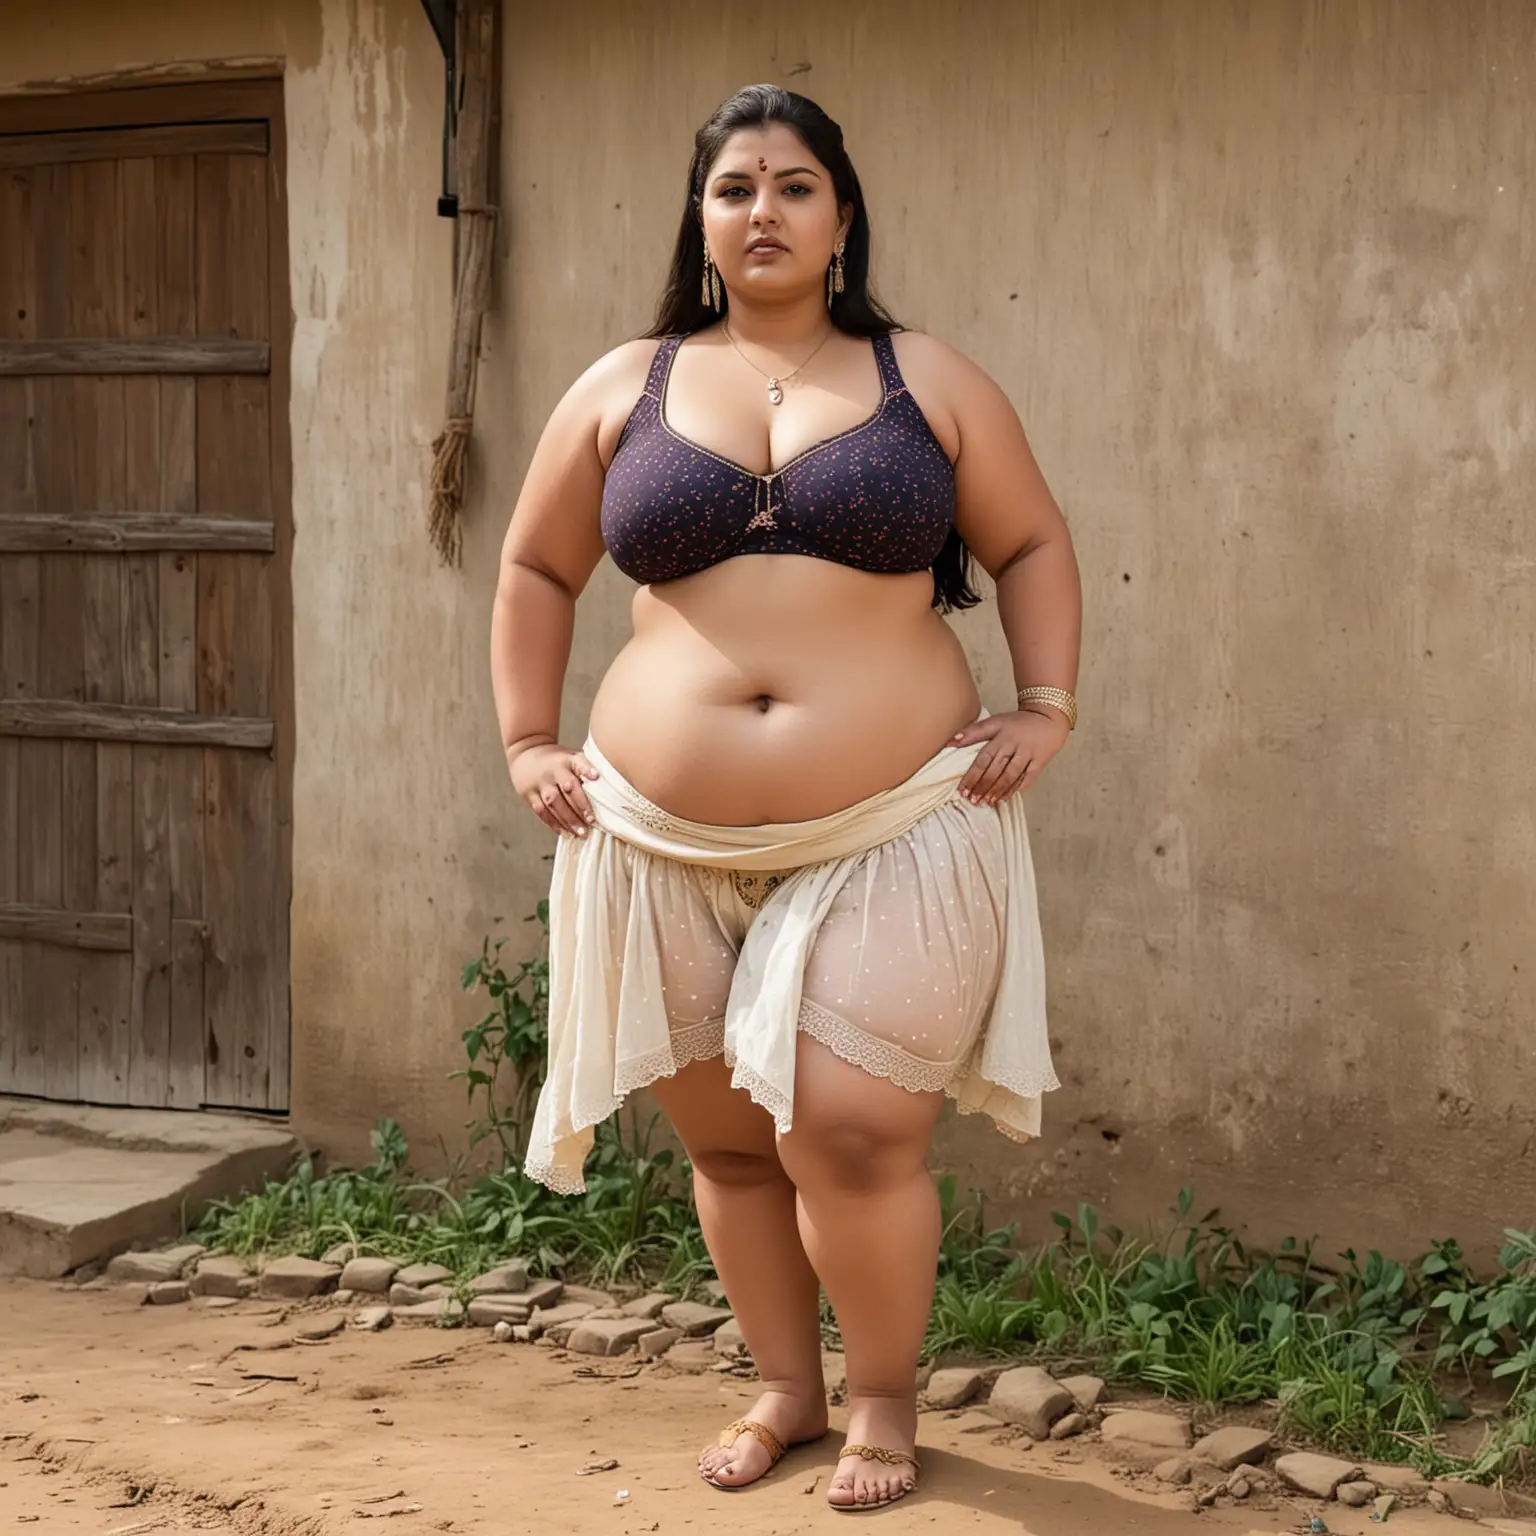 Voluptuous Woman in Traditional Indian Attire Poses in Rural Setting